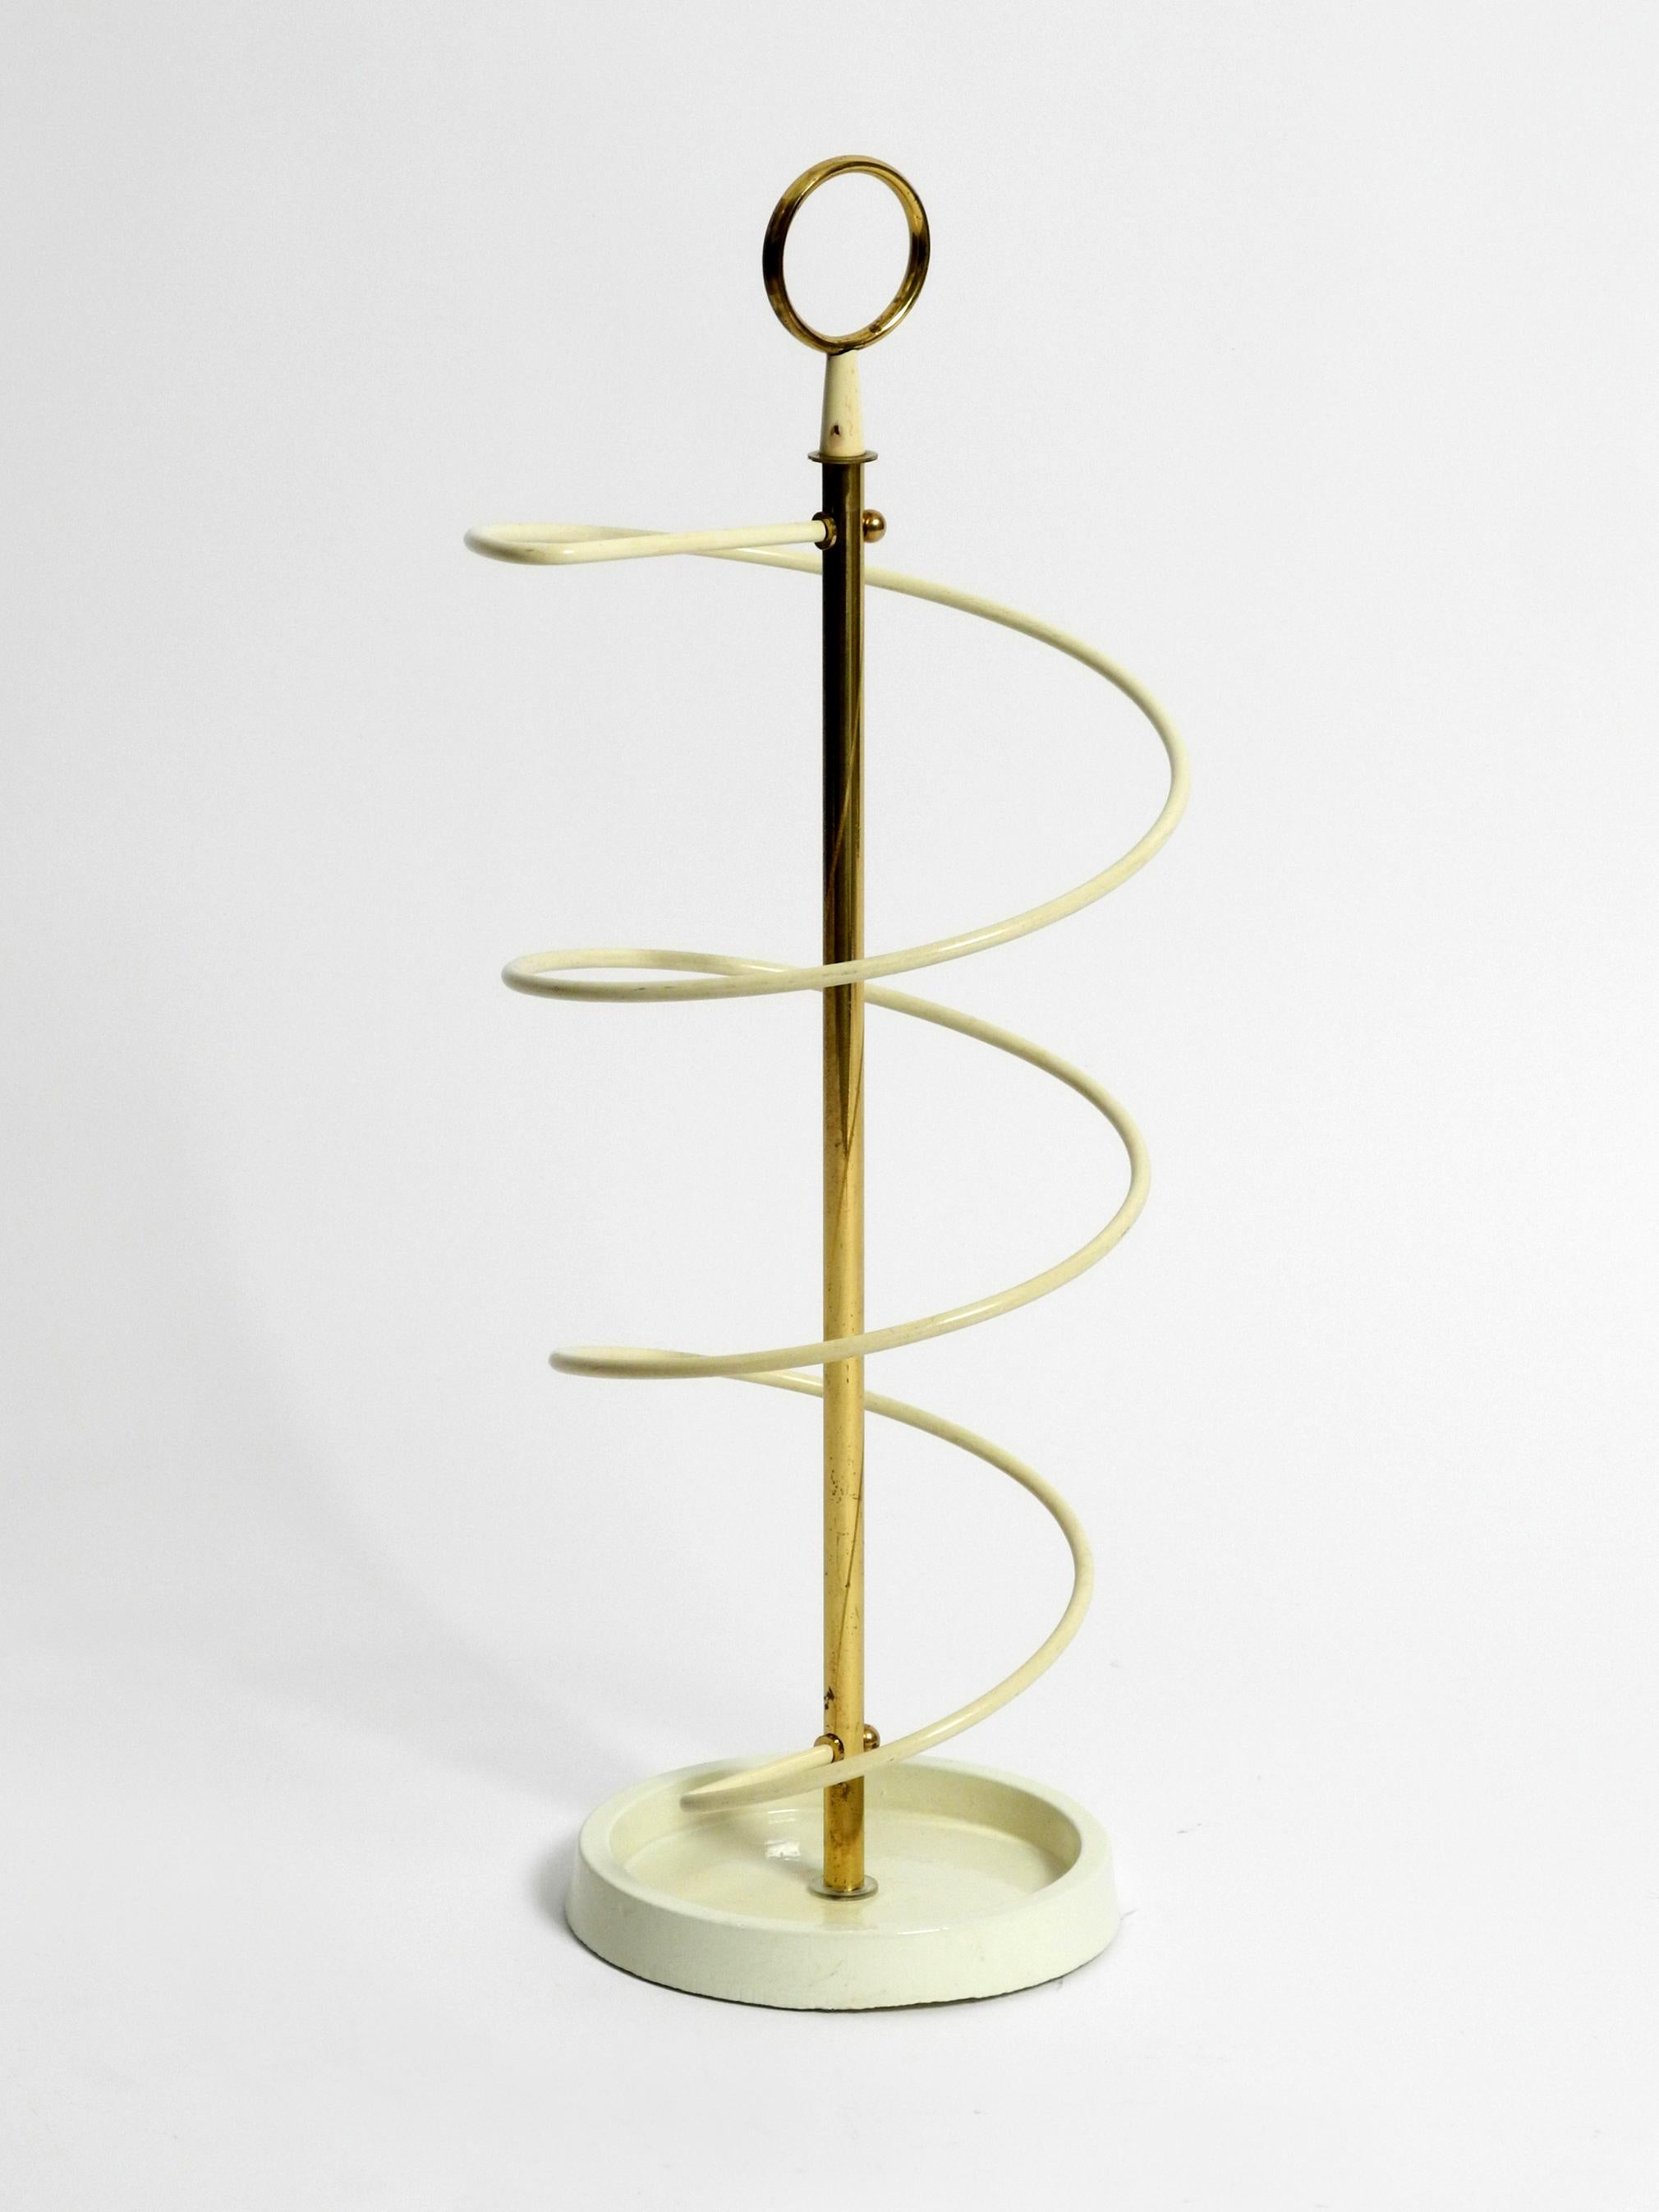 Mid-20th Century Extraordinary Rare Mid-Century Modern Umbrella Stand in String Helix Design For Sale